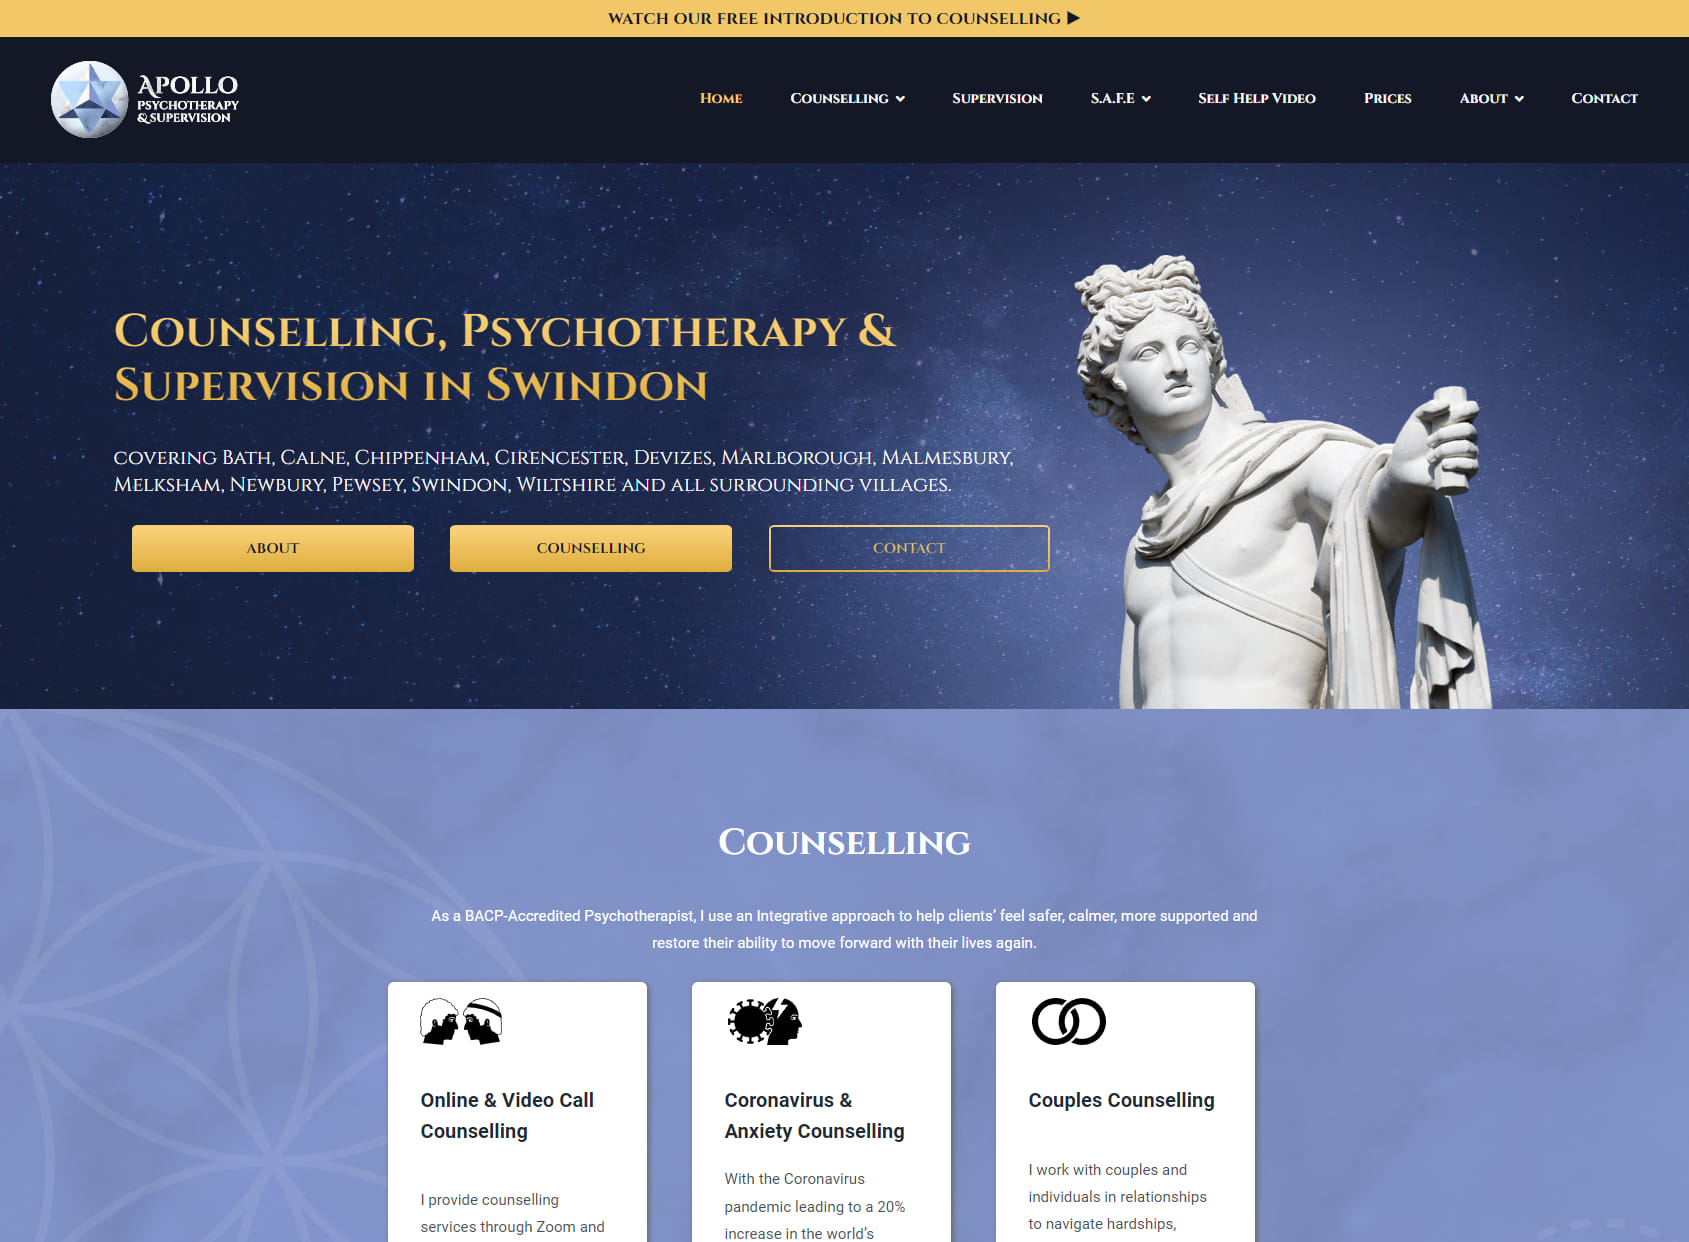 Apollo Counselling & Psychotherapy